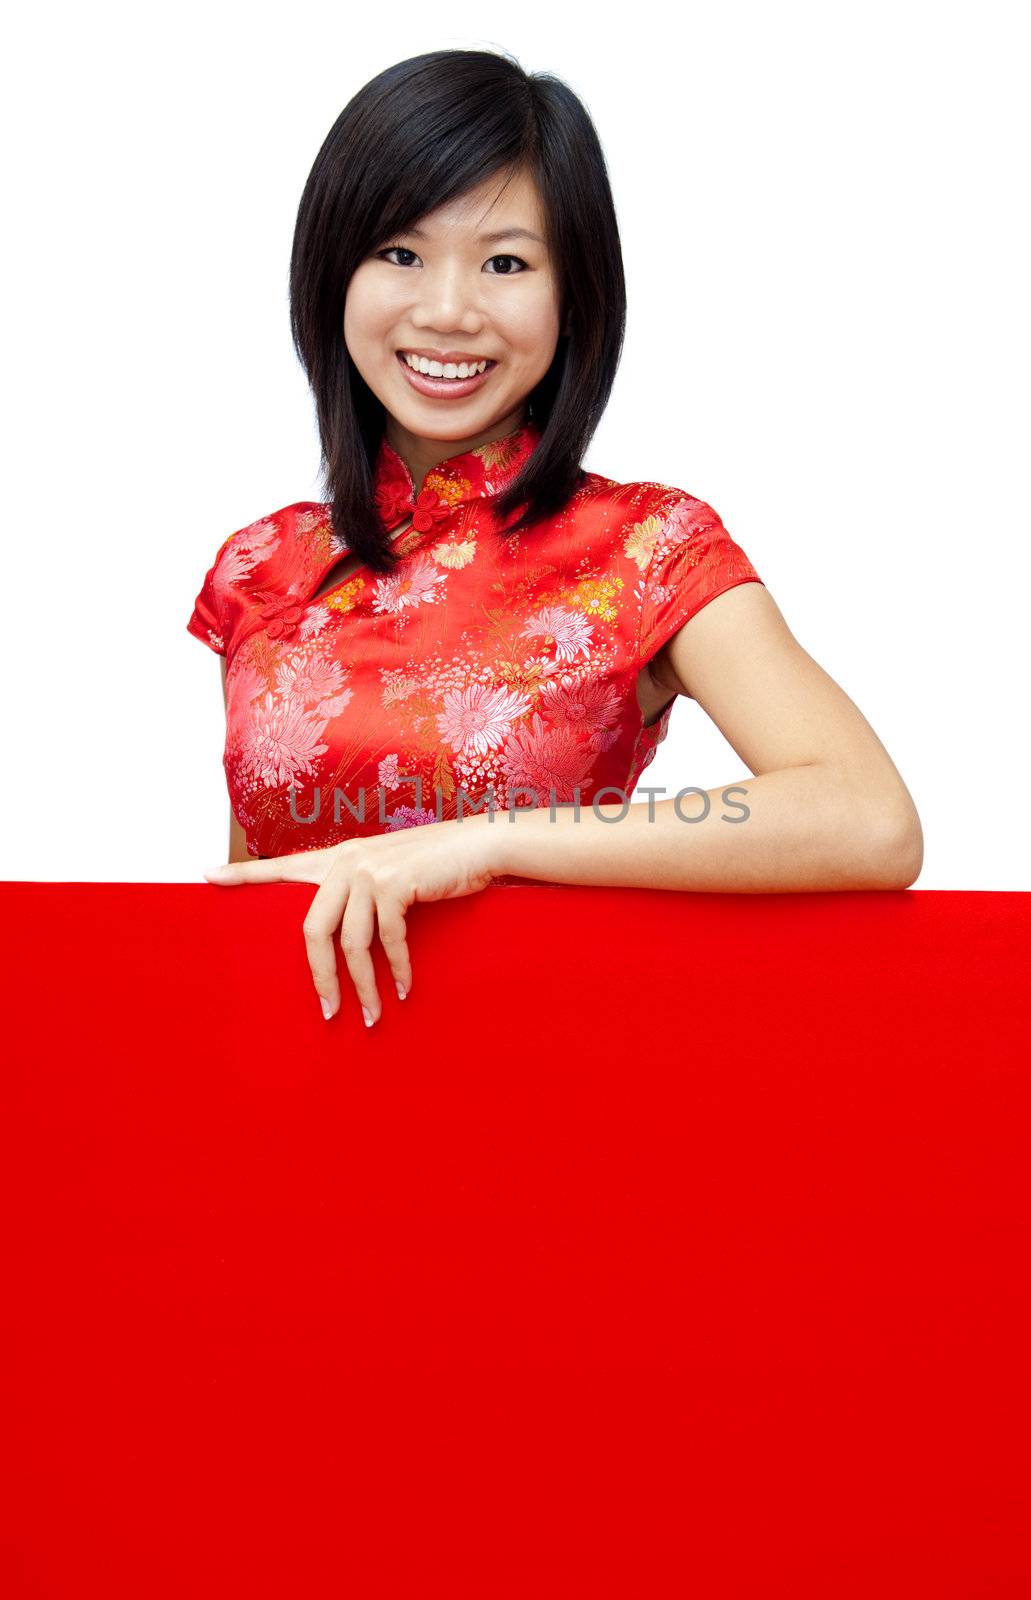 Oriental girl with traditional Cheongsam holding a red blank card.